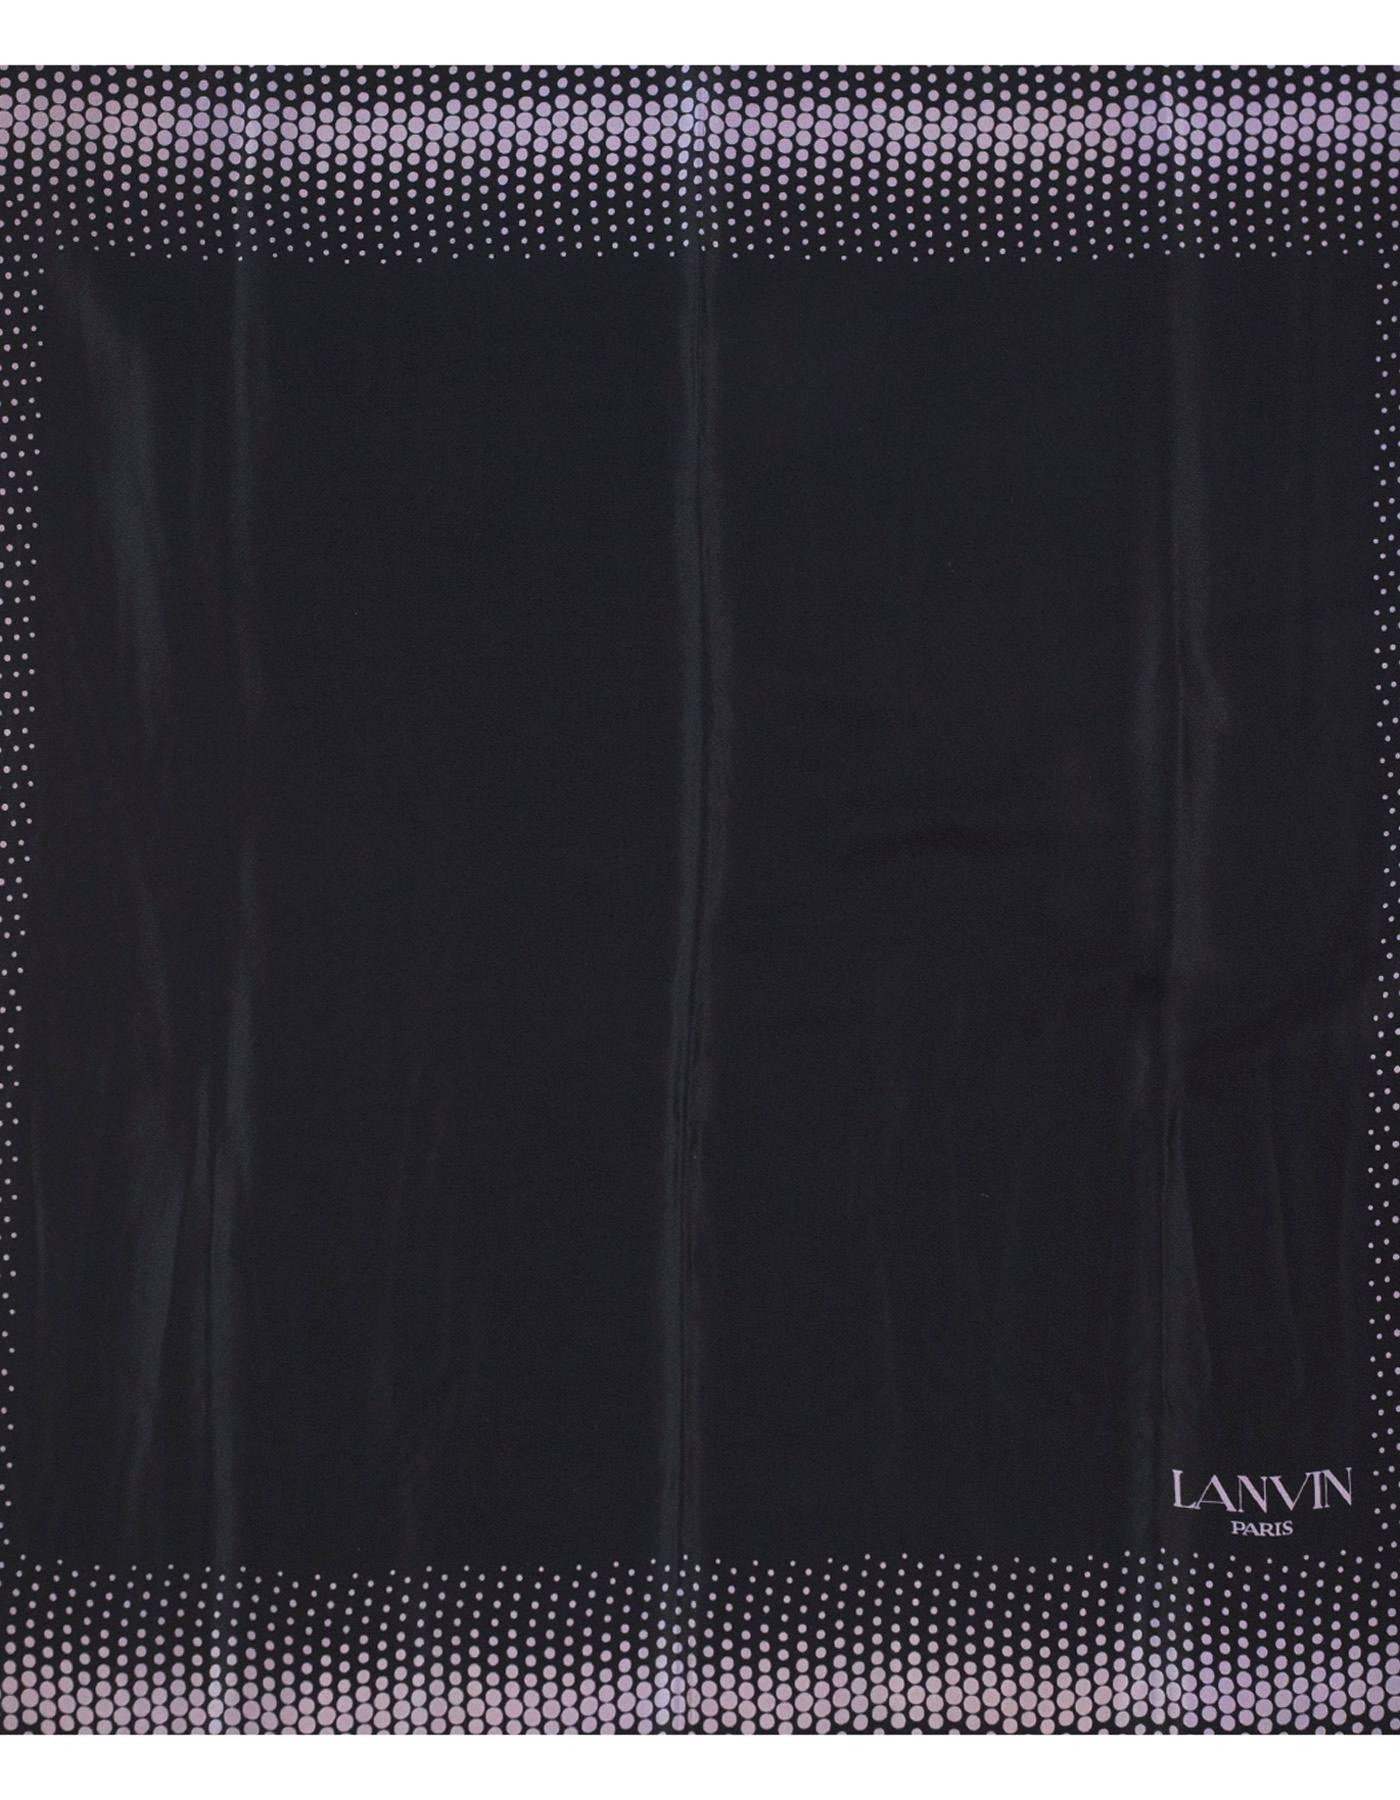 Lanvin Black & Purple Polka Dot Silk Scarf 
Features Lanvin Paris printed on bottom corner

Color: Black and purple
Composition: Not given- believed to be 100% silk
Overall Condition: Excellent pre-owned condition with the exception of missing